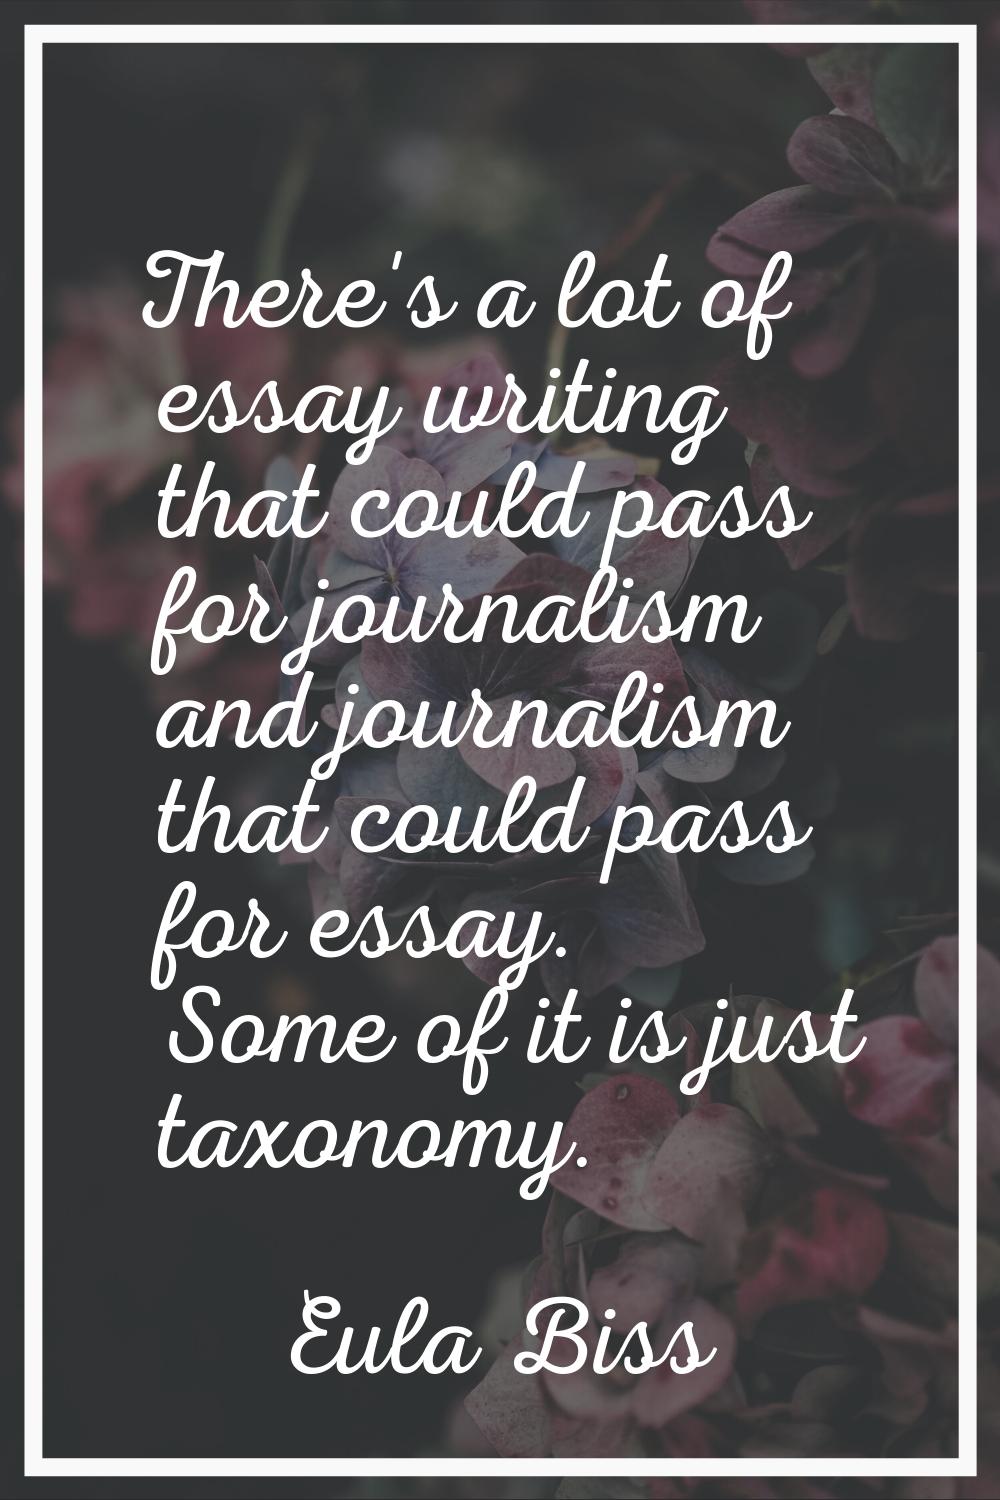 There's a lot of essay writing that could pass for journalism and journalism that could pass for es